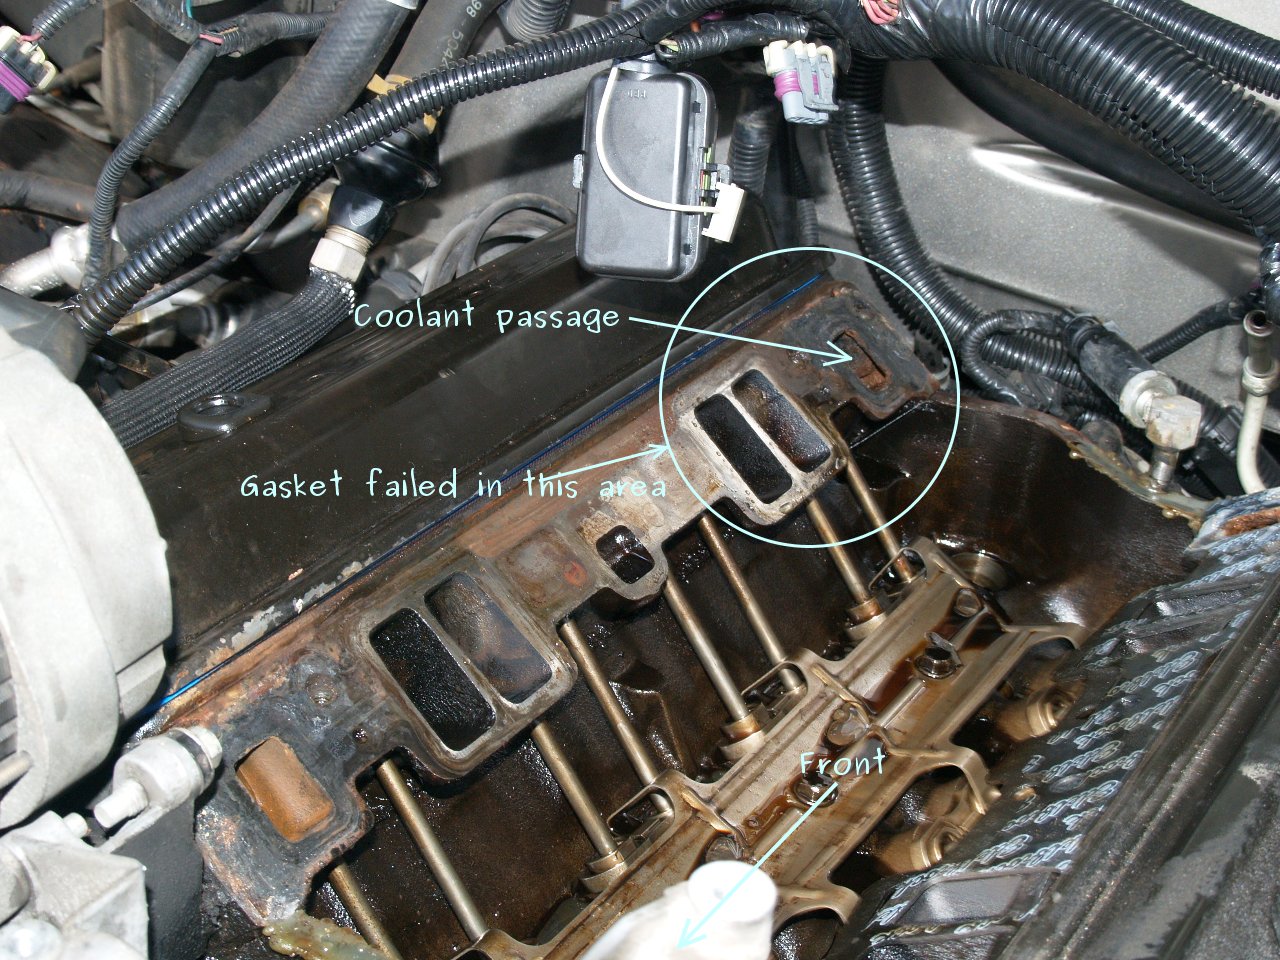 See B1264 in engine